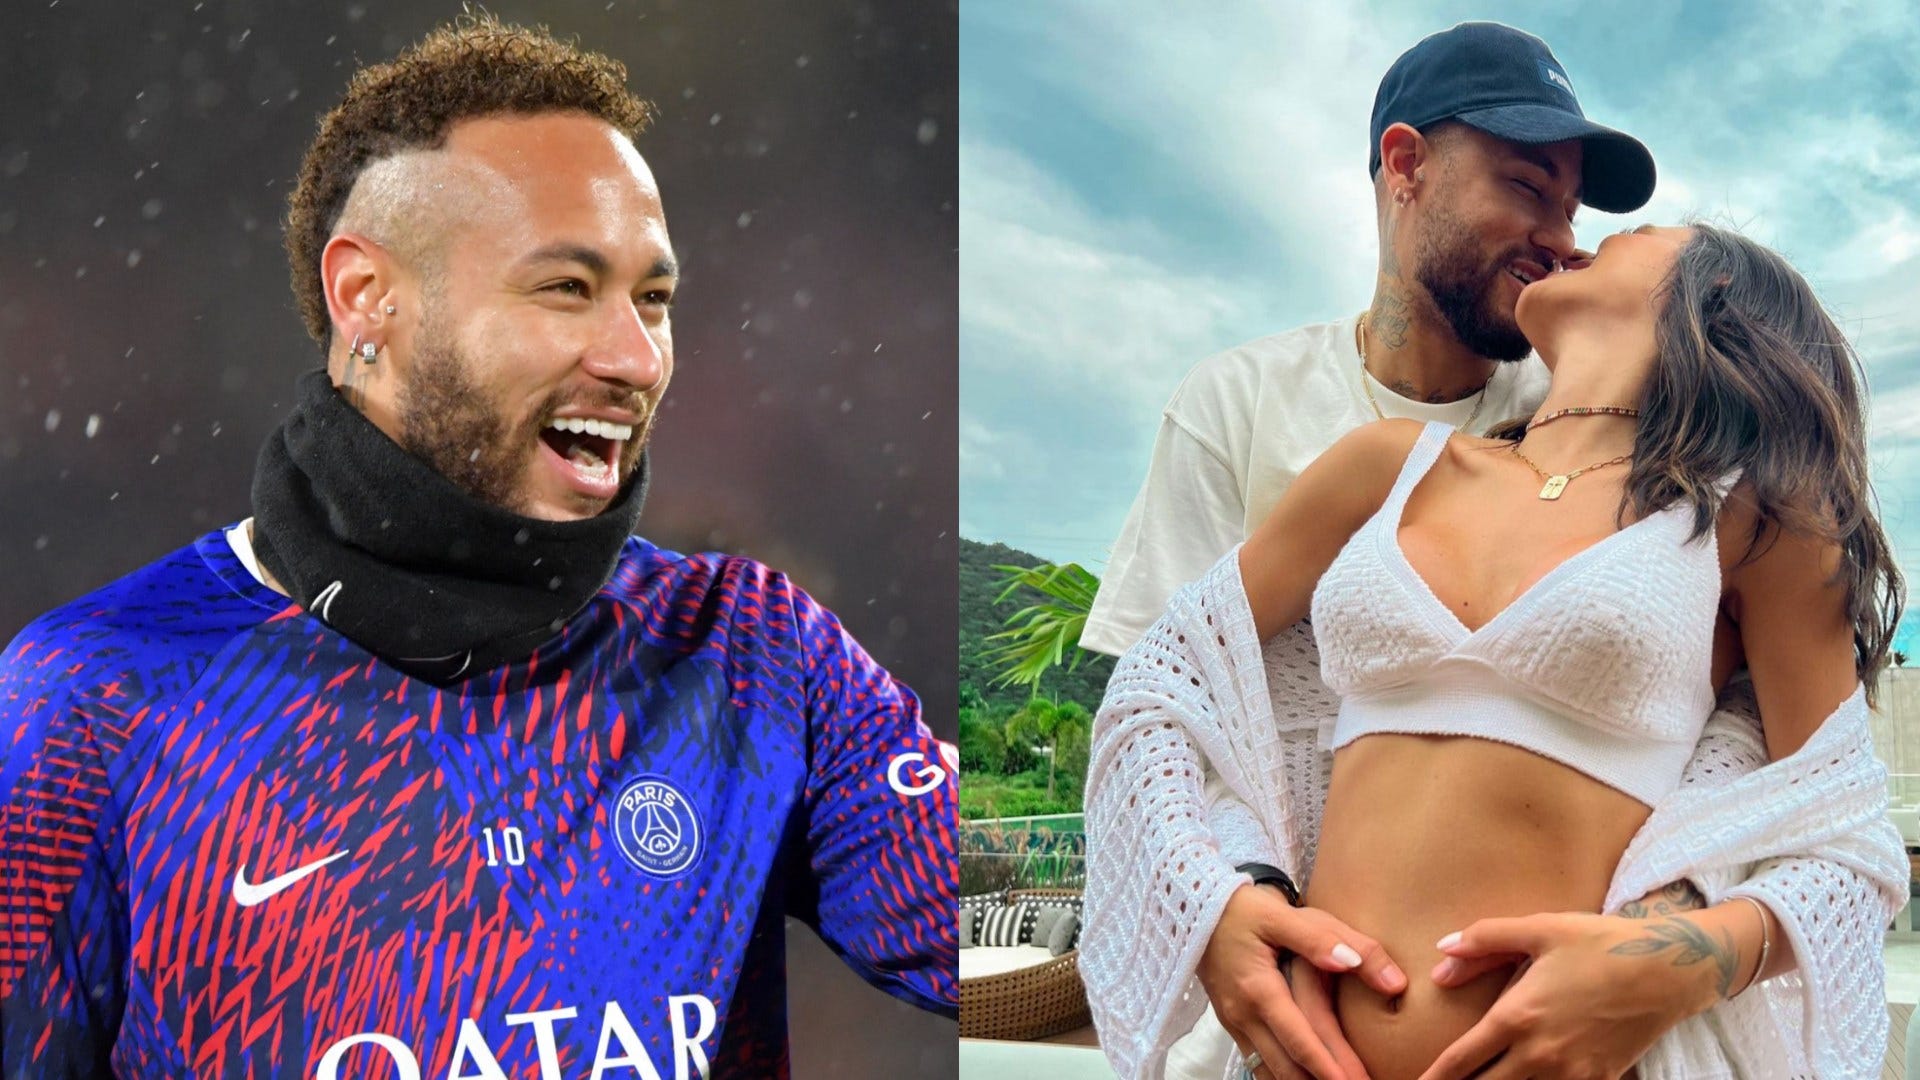 Neymar and PSG stars girlfriend Bruna Biancardi announce they are expecting first child together Goal US